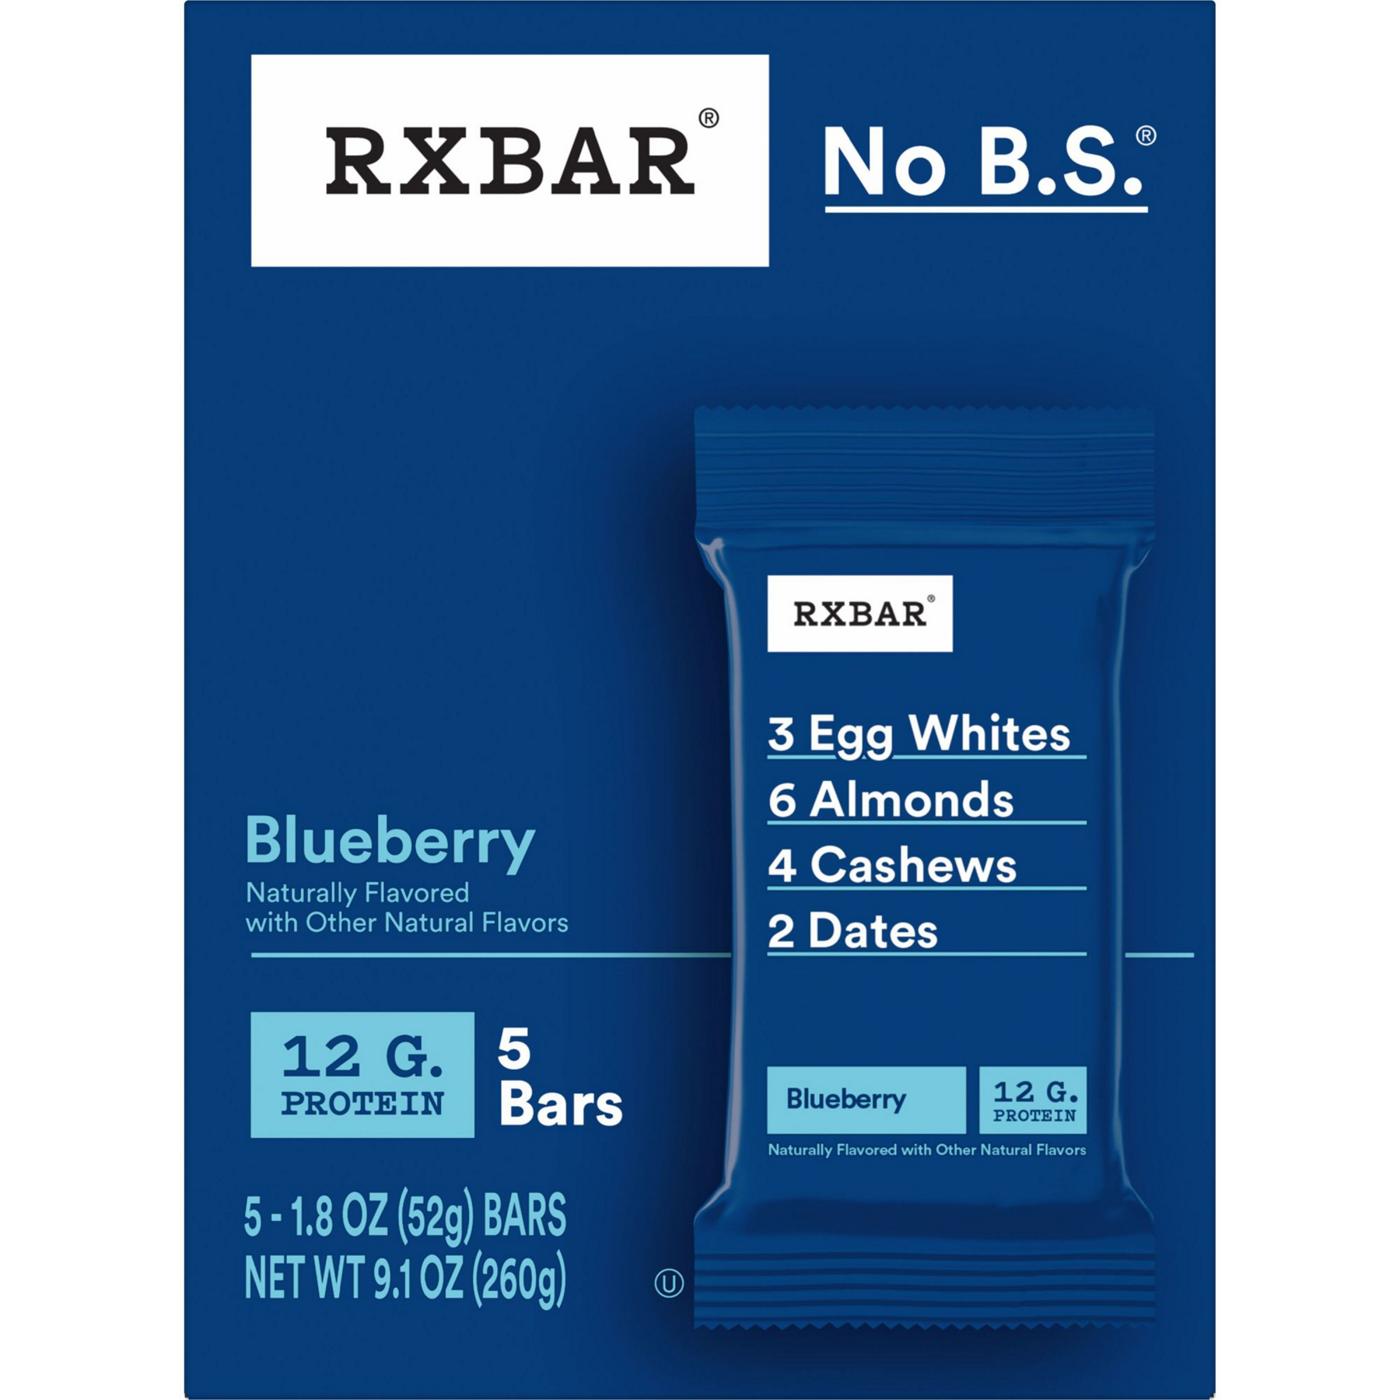 RXBAR Blueberry Protein Bars; image 1 of 3